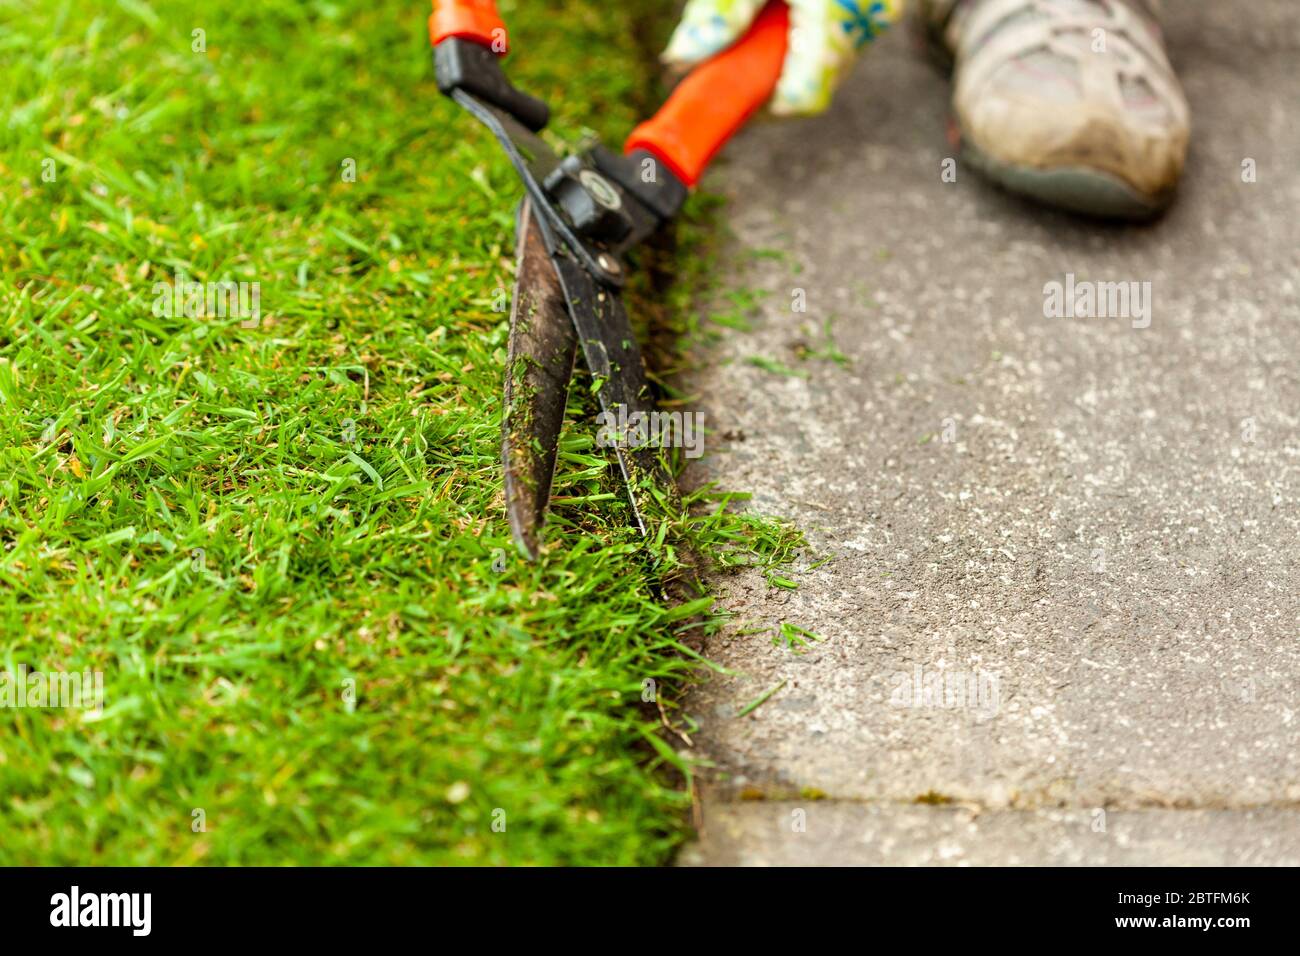 Tidying lawn edge with garden clippers. Selective focus Stock Photo